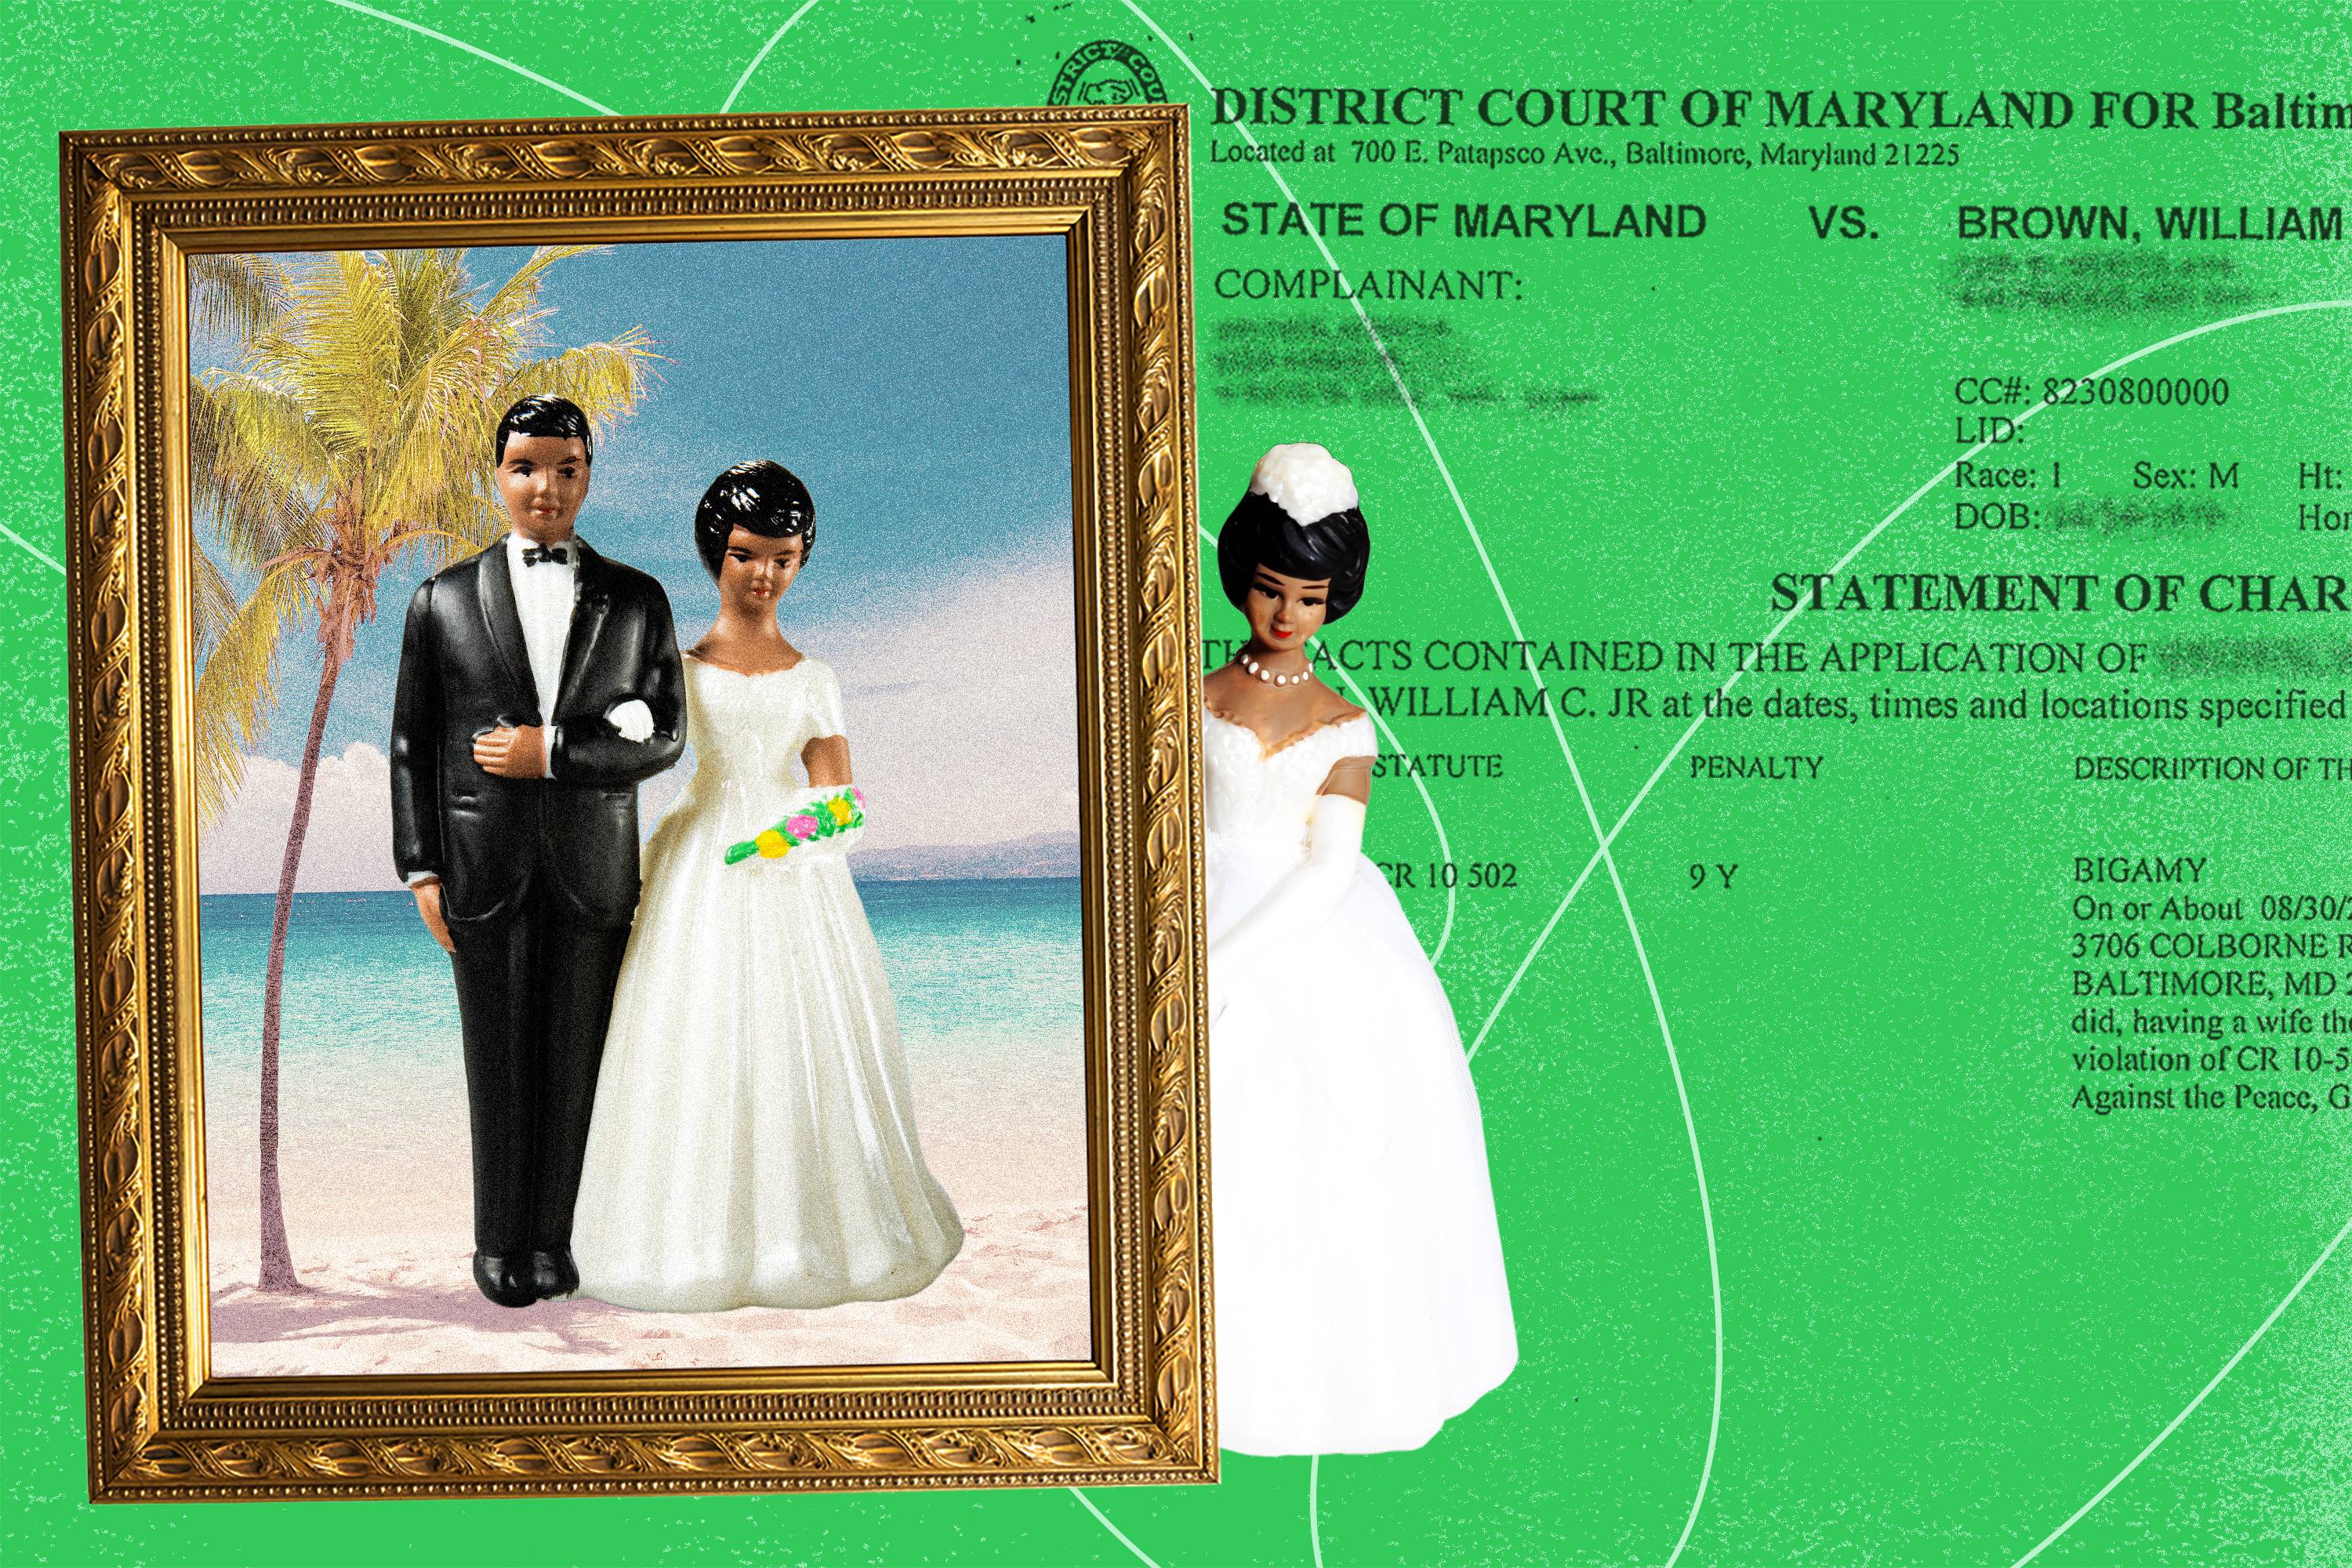 A photo in a golden frame shows African American bride and groom figurines standing on a tropical beach; another bride figurine pops out from behind the frame. Over the green background is a charging document accusing the defendant of bigamy.